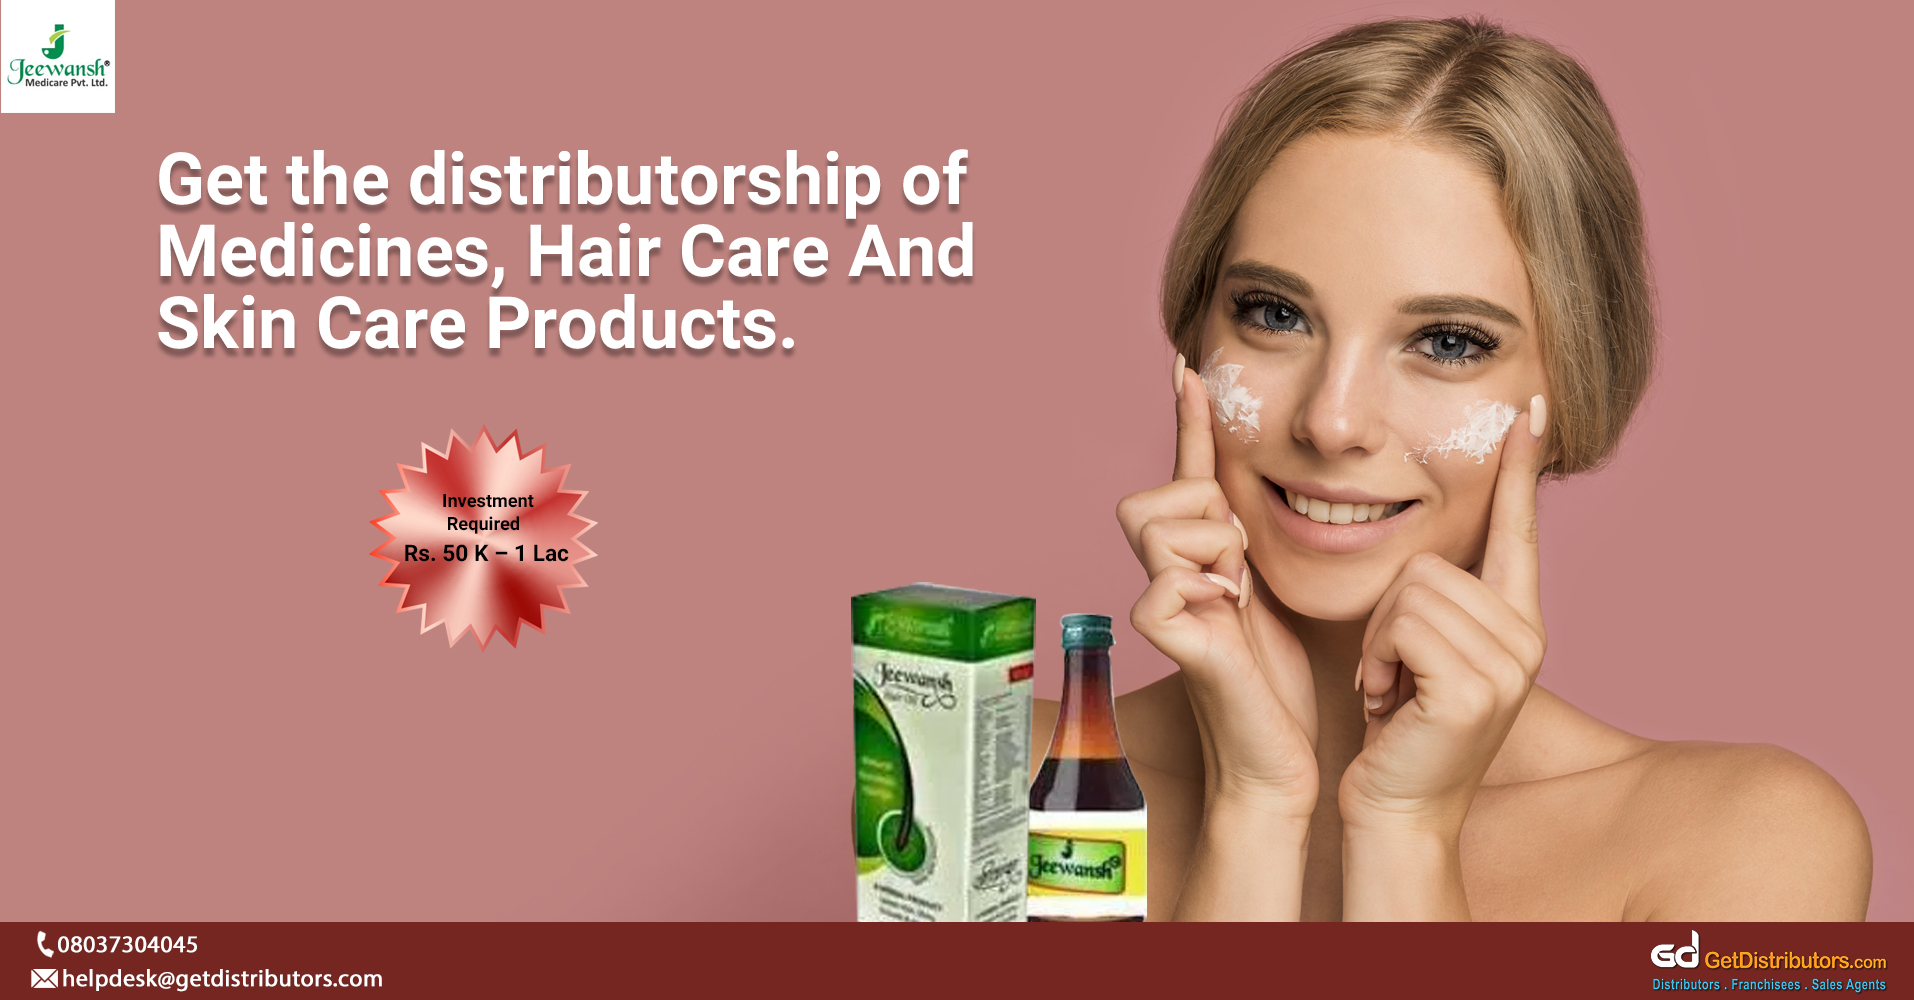 Health and beauty products for distribution